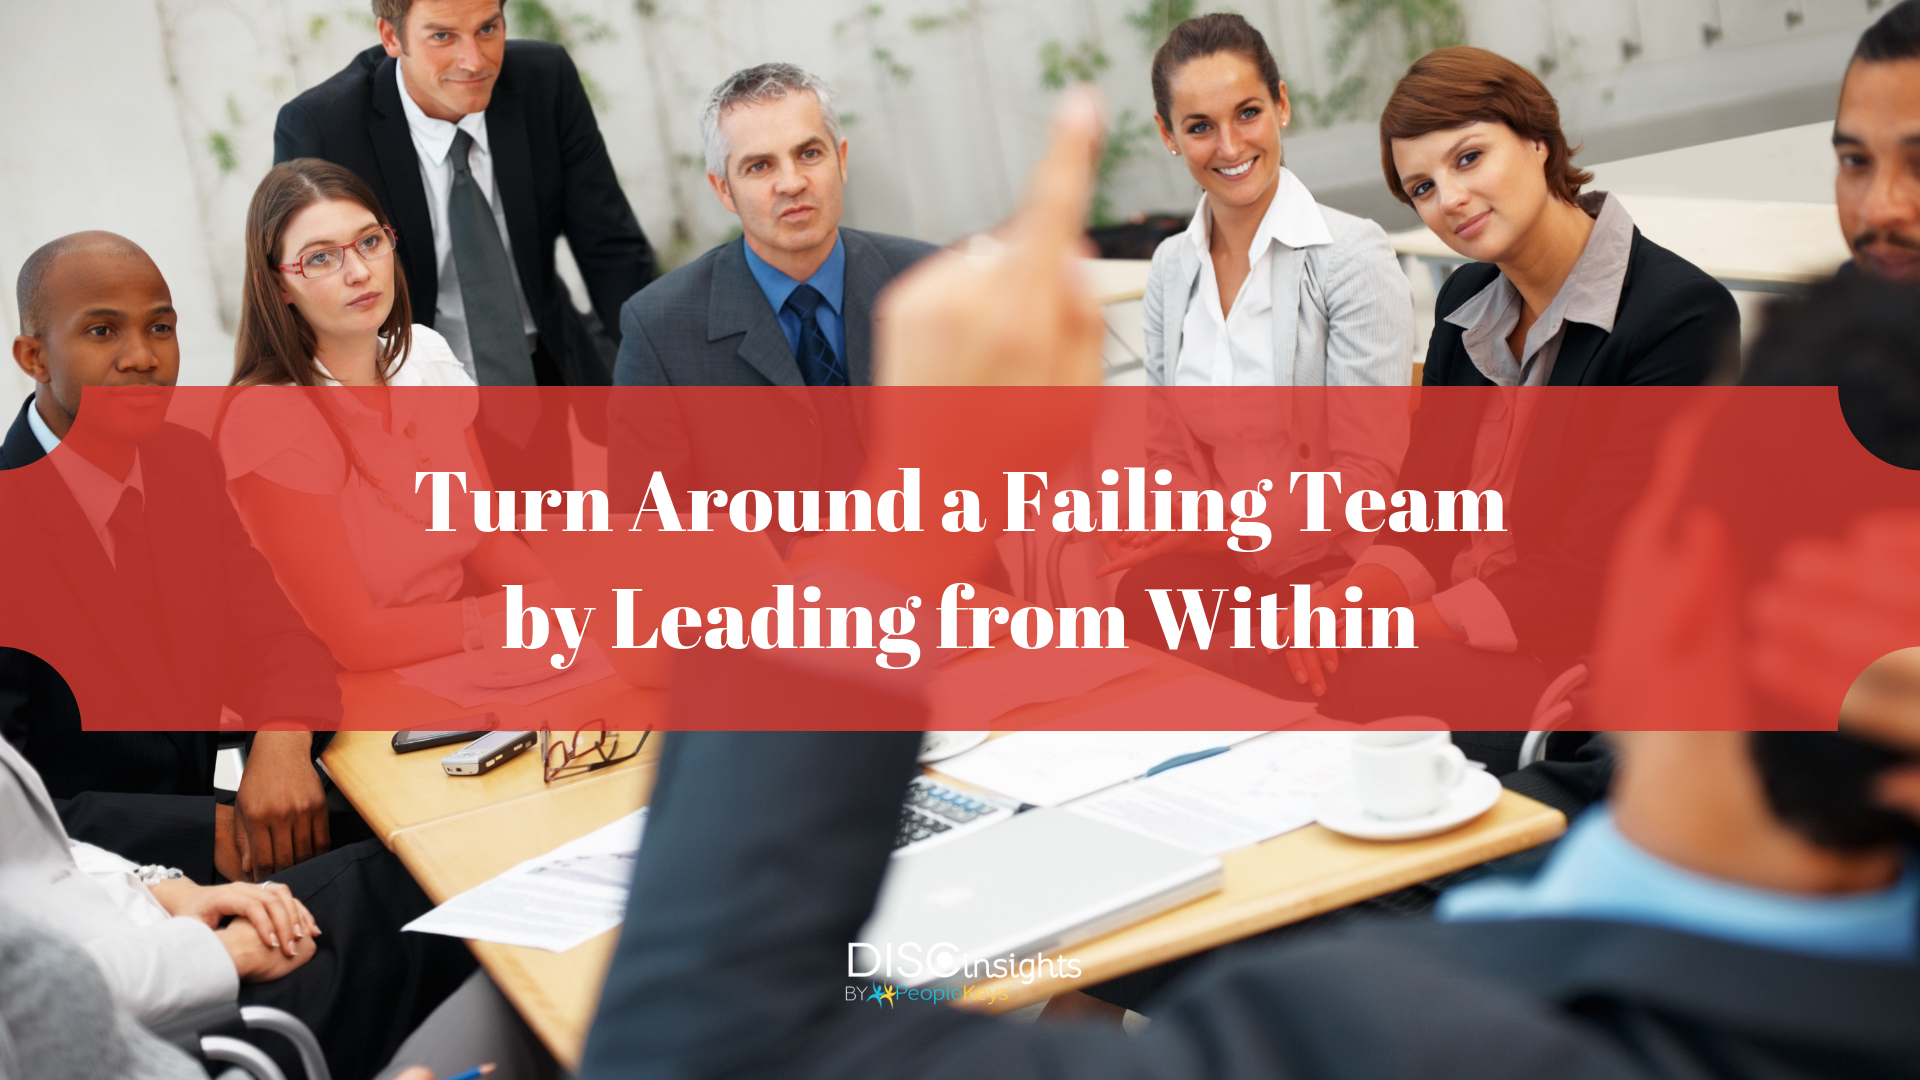 Turn Around a Failing Team by Leading from Within